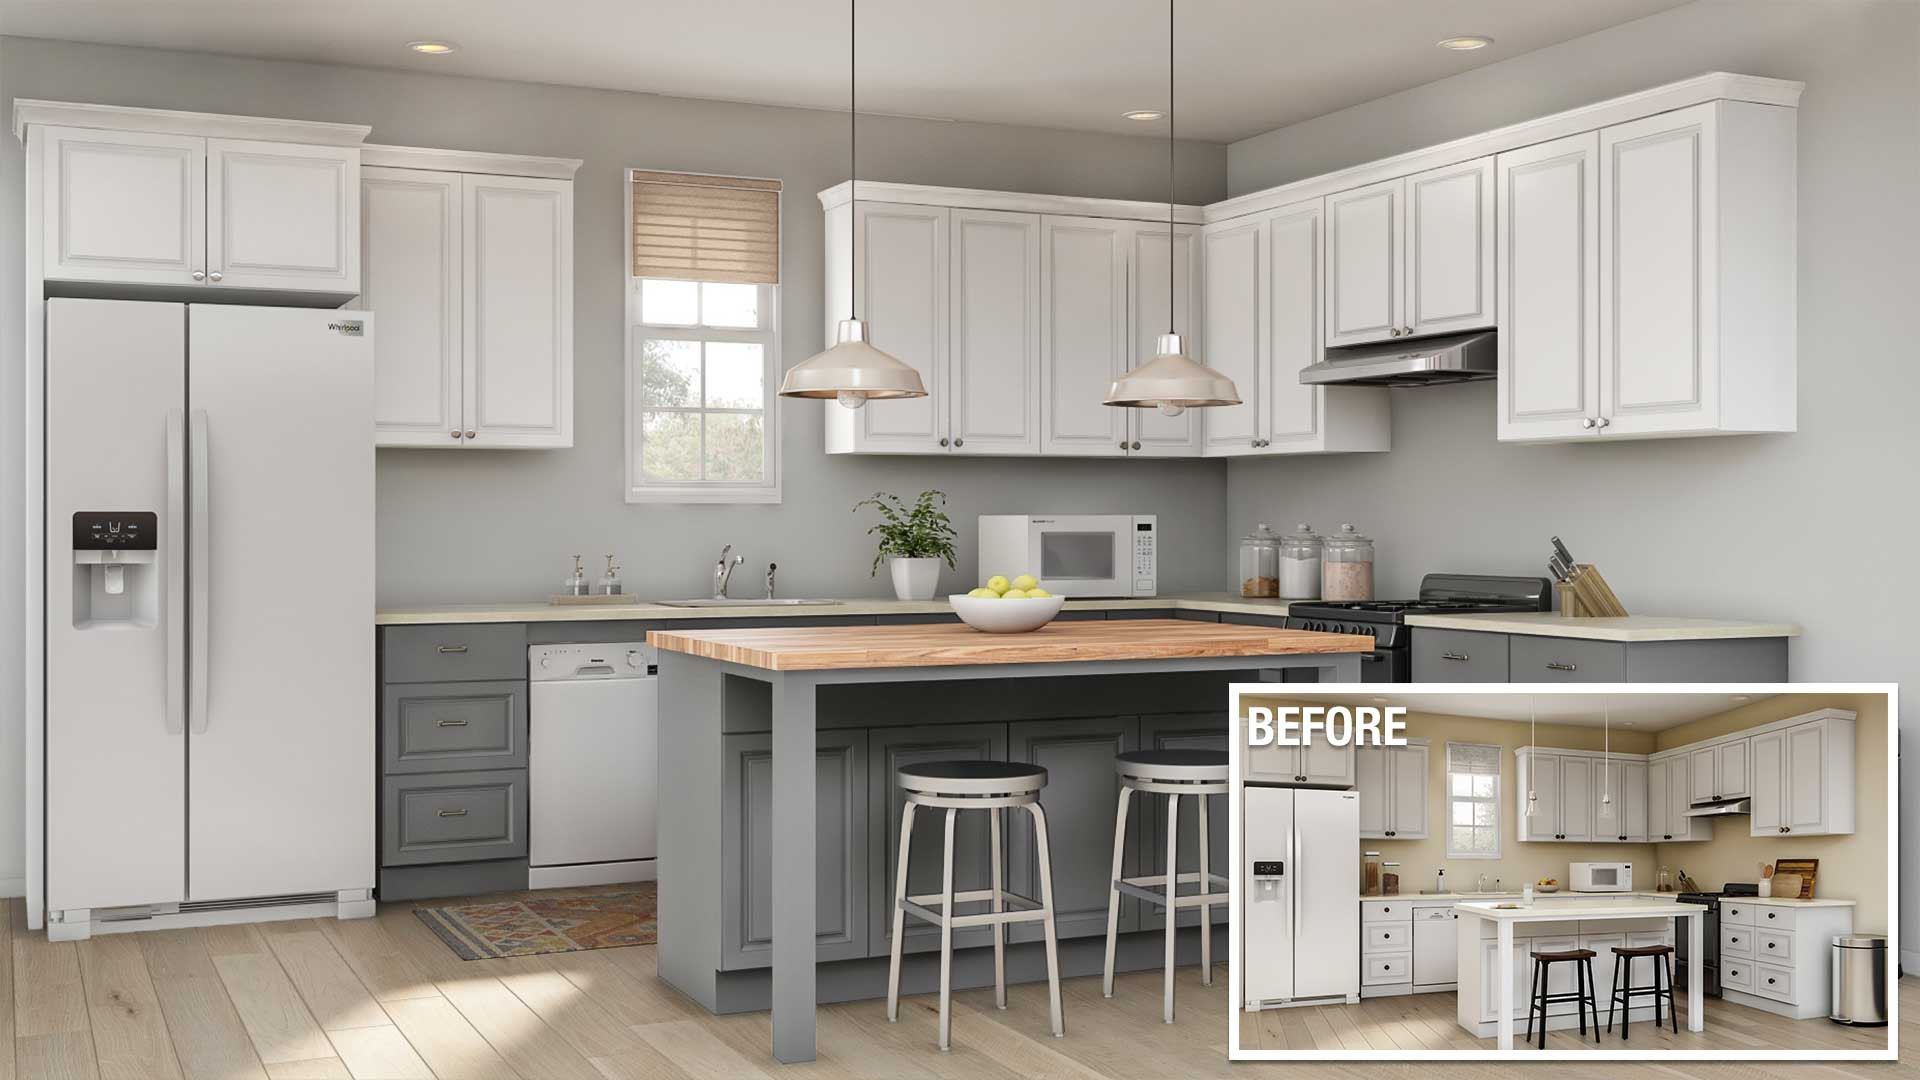 Kitchen Remodel Ideas
 Cost to Remodel a Kitchen The Home Depot